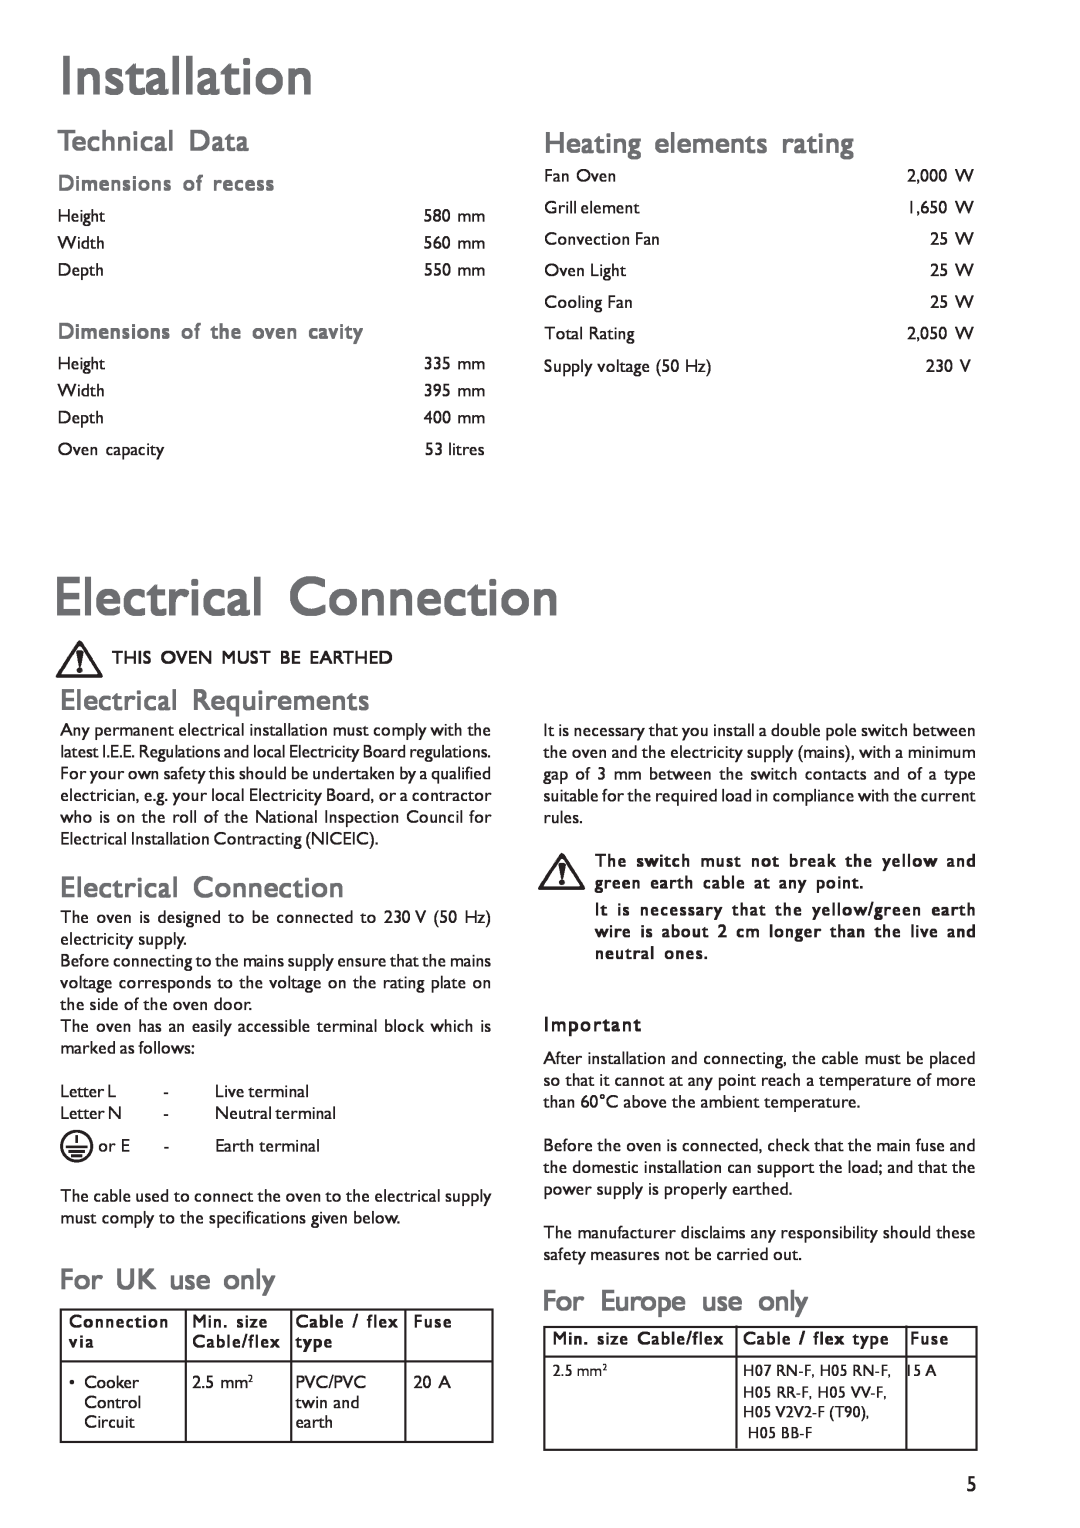 John Lewis JLBIOS601 Installation, Electrical Connection, Technical Data, Heating elements rating, Electrical Requirements 